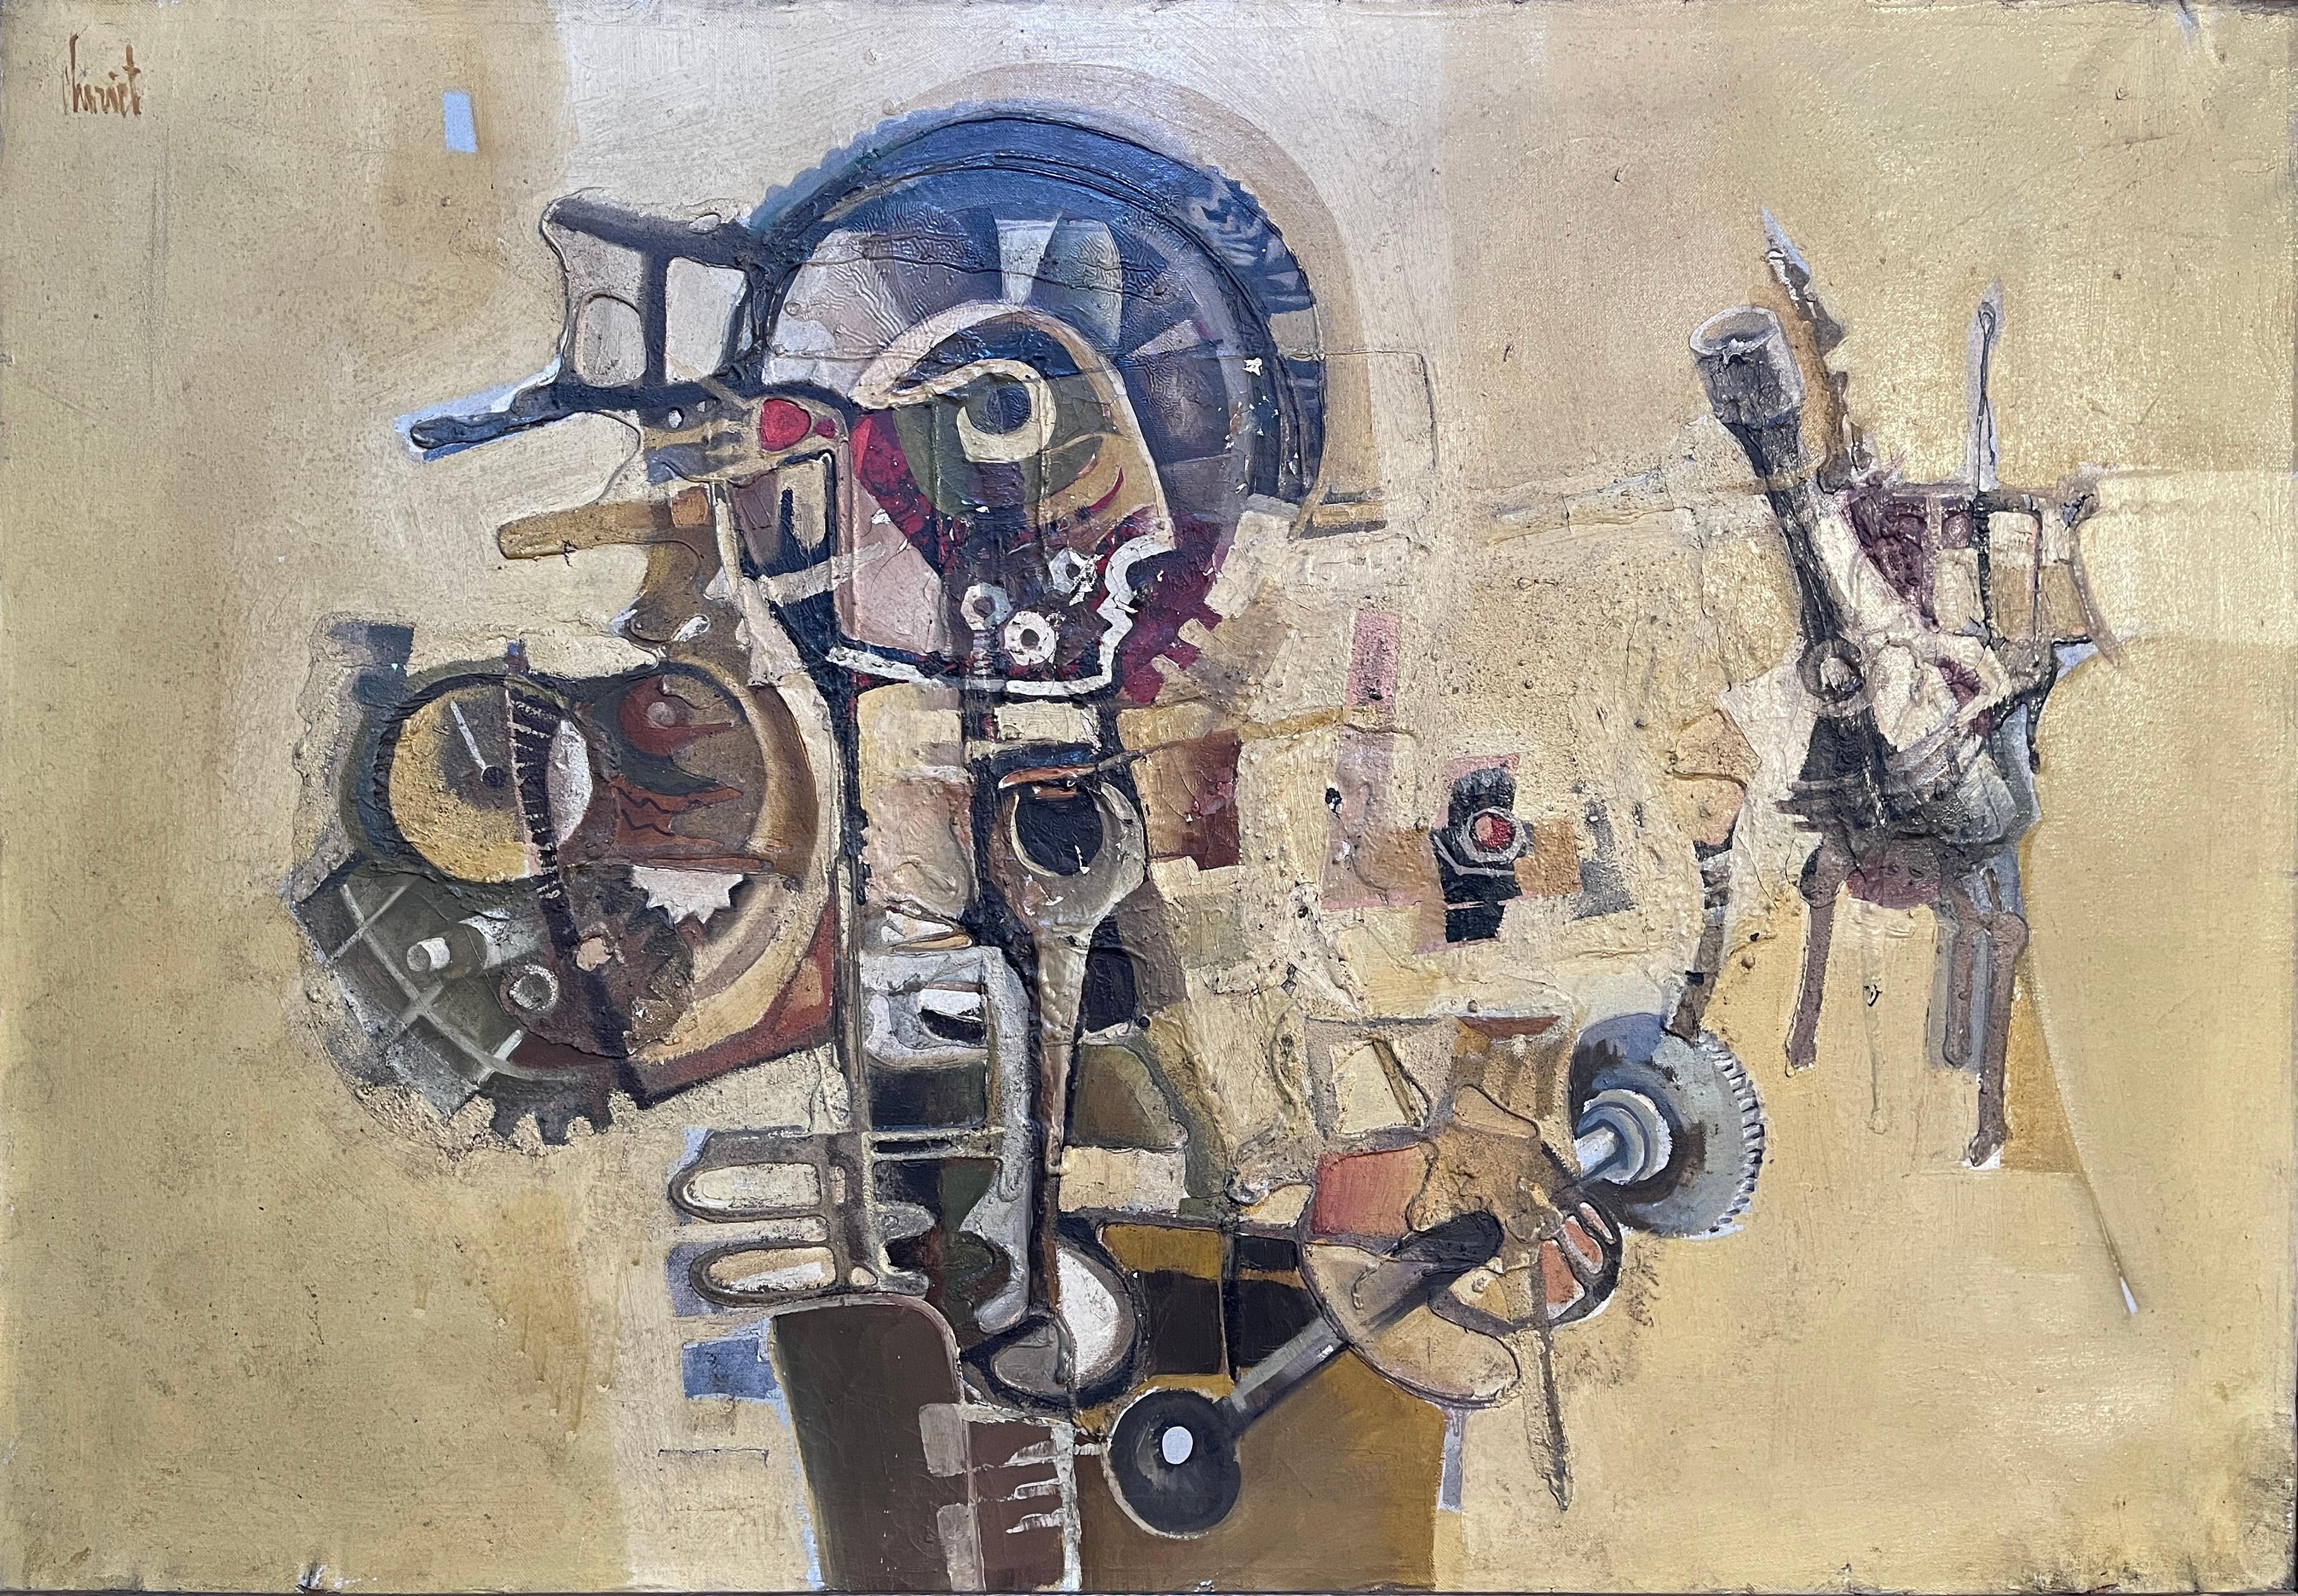 Abstract mixed media painting on canvas, A. Cheriet, 1975
Painting by contemporary artist, A Cheriet, abstract, entitled “Mechanisms of prostitution”.
Good condition, some signs of wear due to age
Dimensions: 100x70 cm